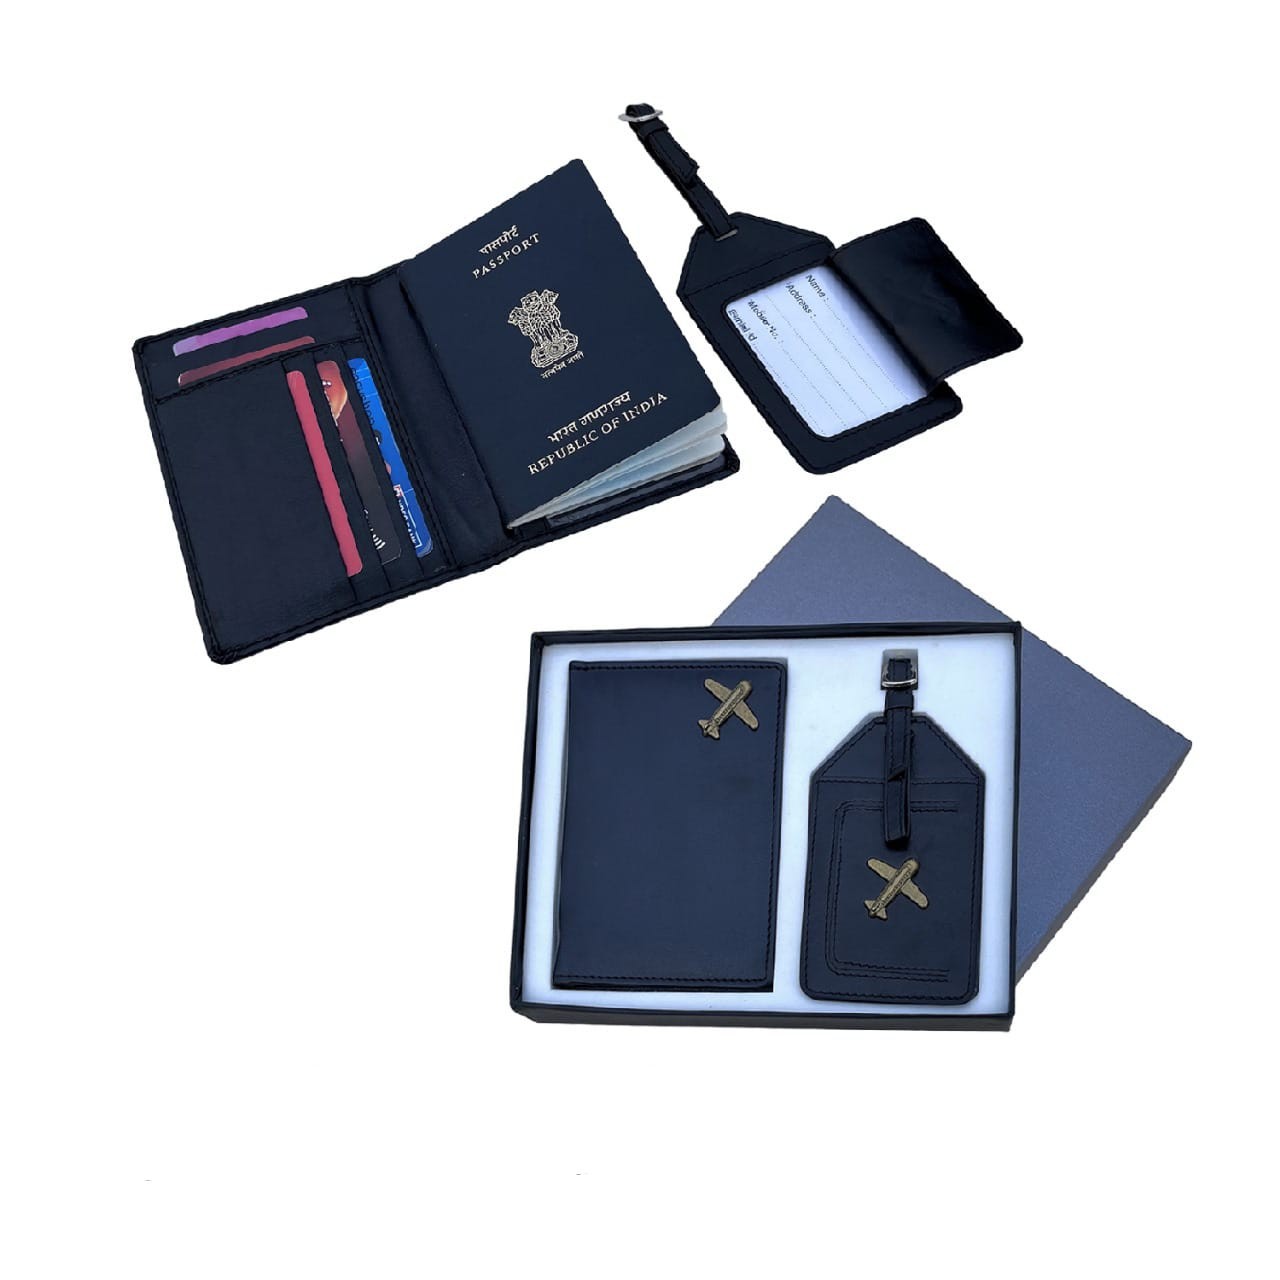 Ally Stylish Passport Cover for Travellers with Durable Luggage Tag-Travel Identification Combo Set, Black